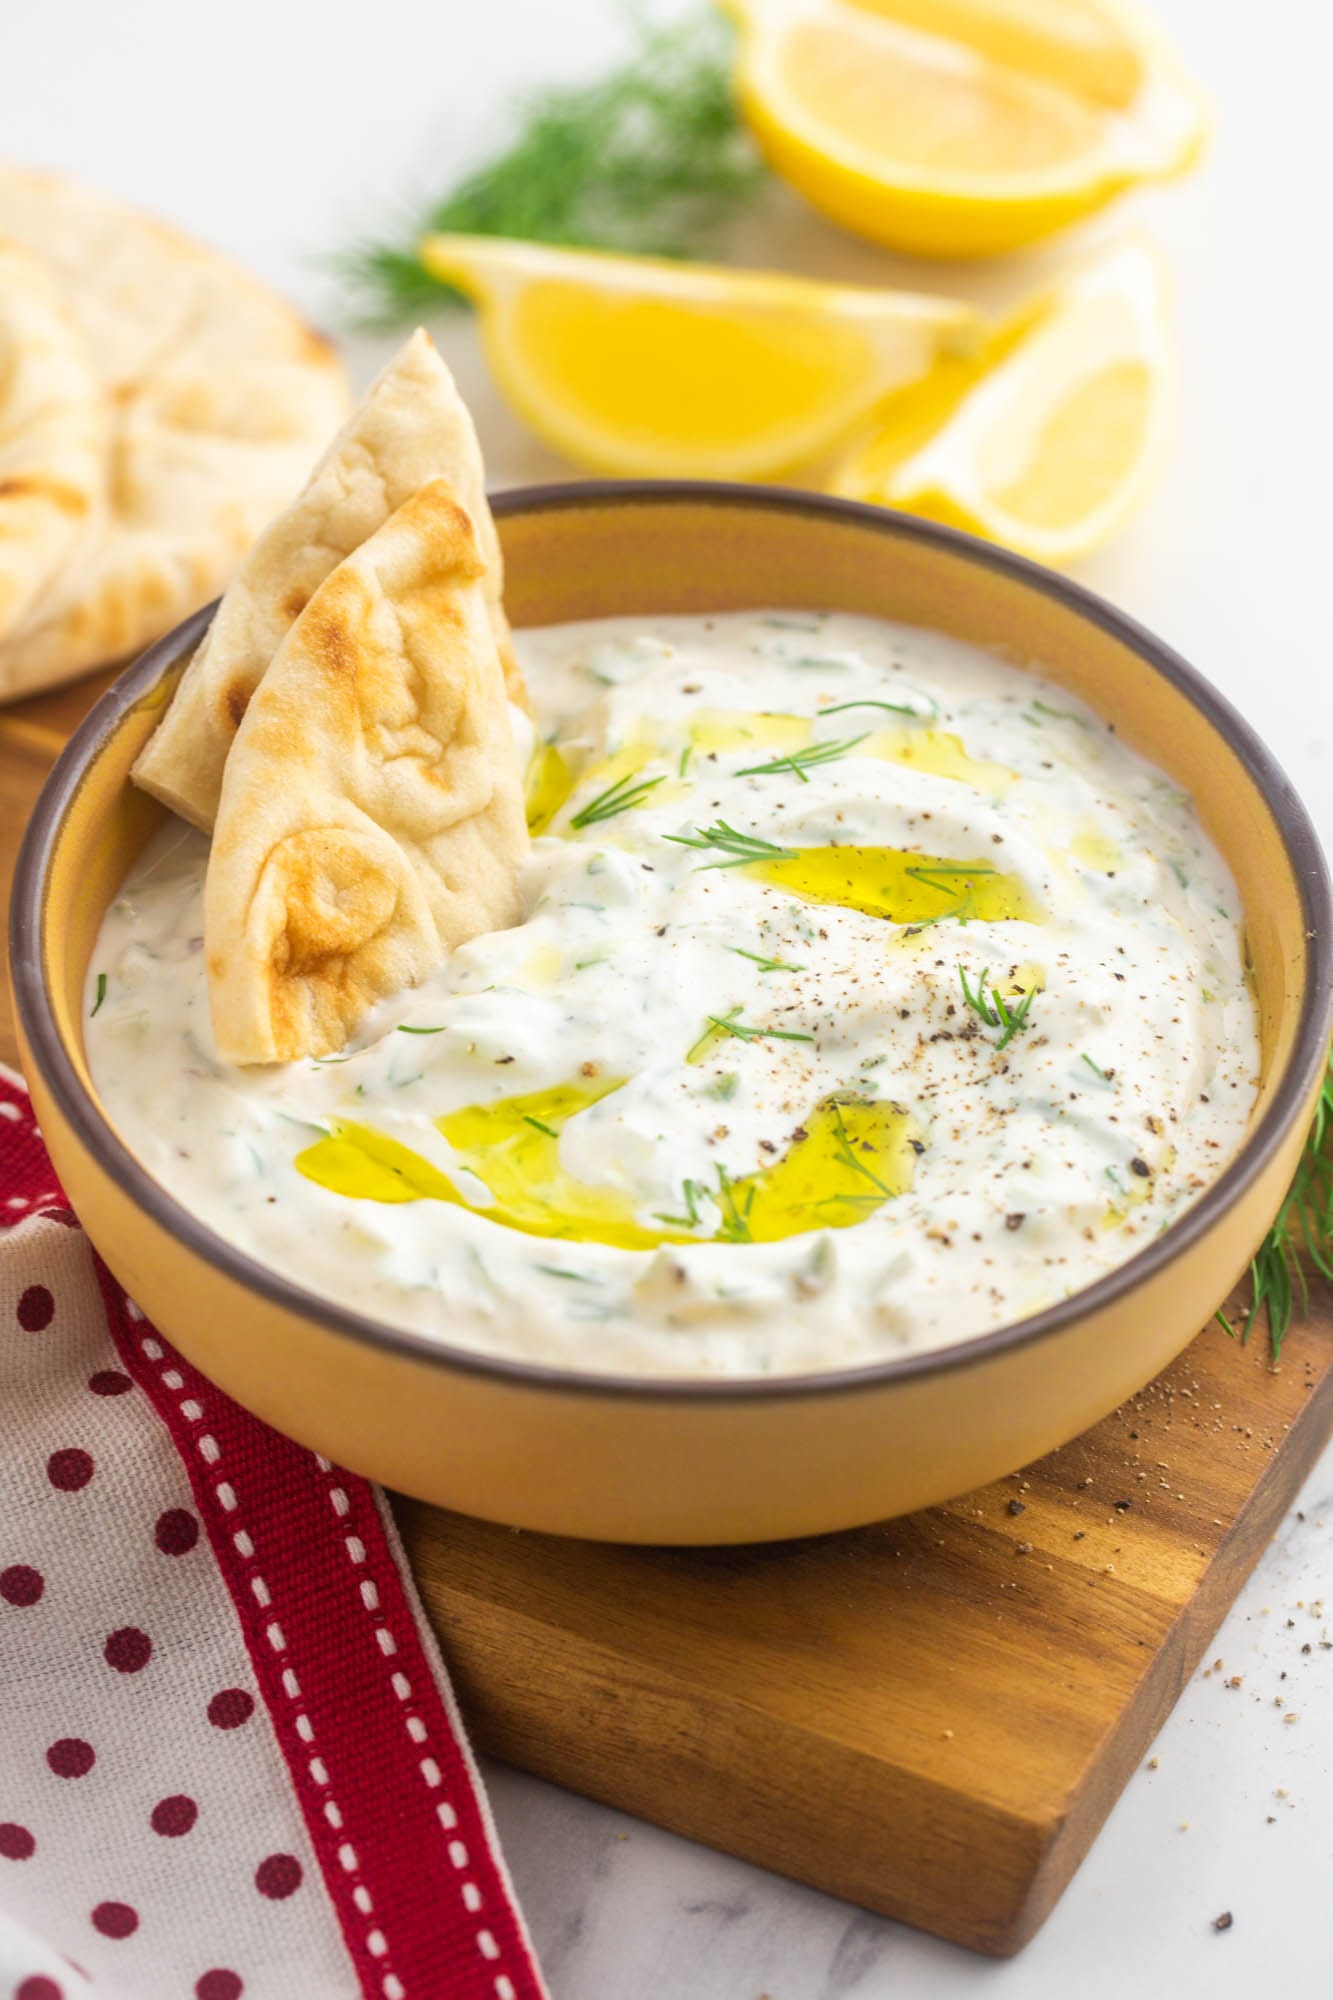 A bowl of tzatziki topped with extra virgin olive oil, fresh herbs, and pita triangles.